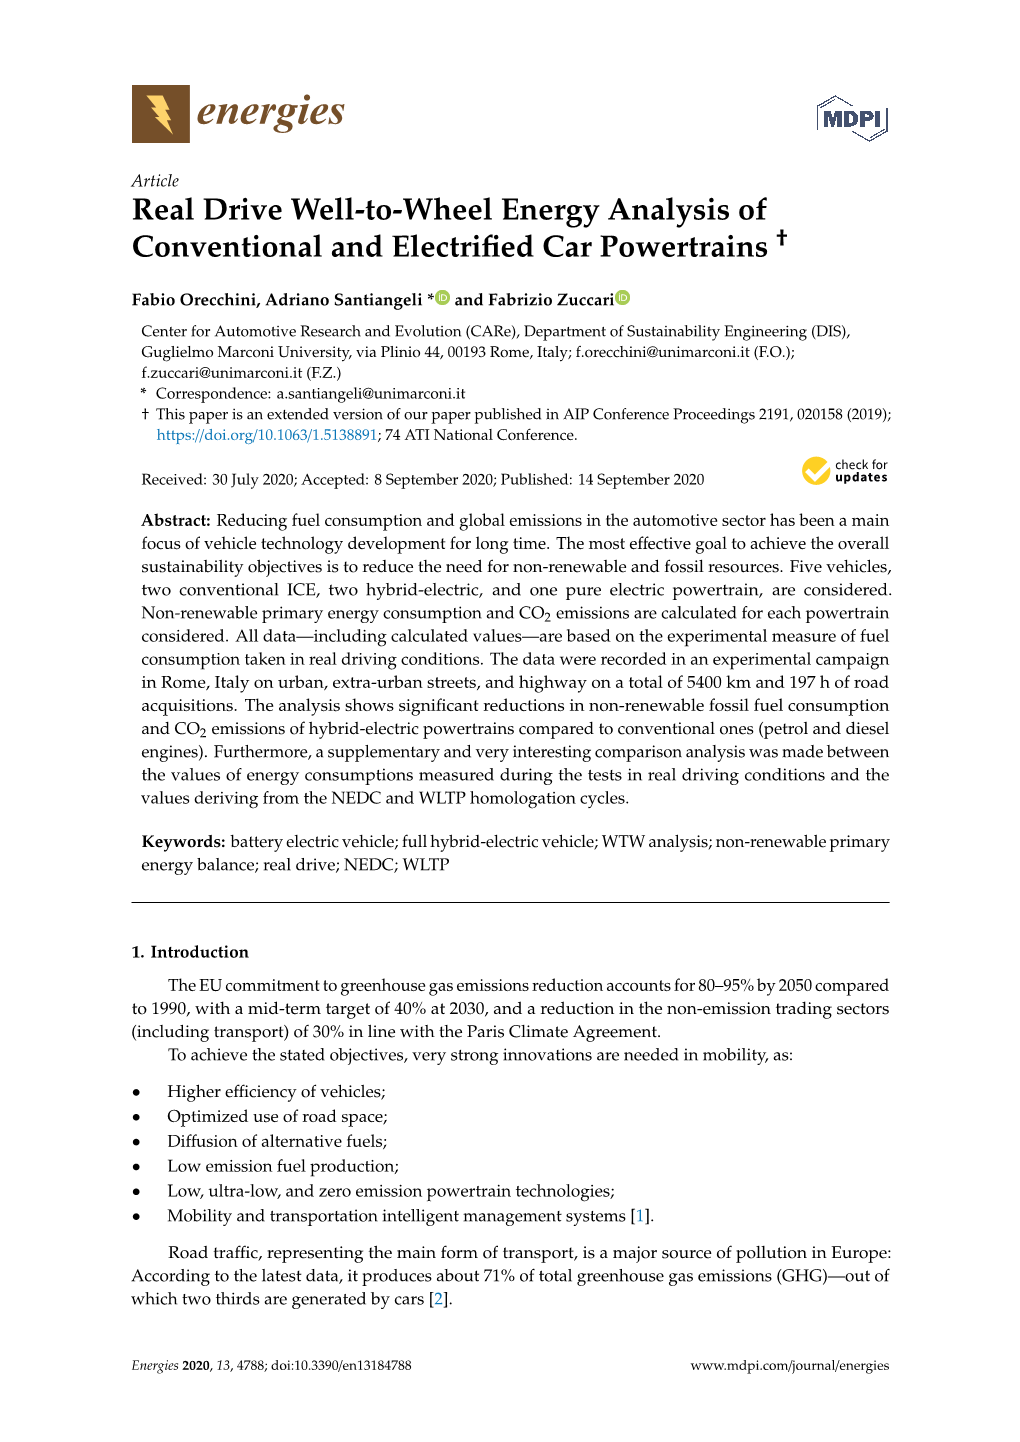 Real Drive Well-To-Wheel Energy Analysis of Conventional And